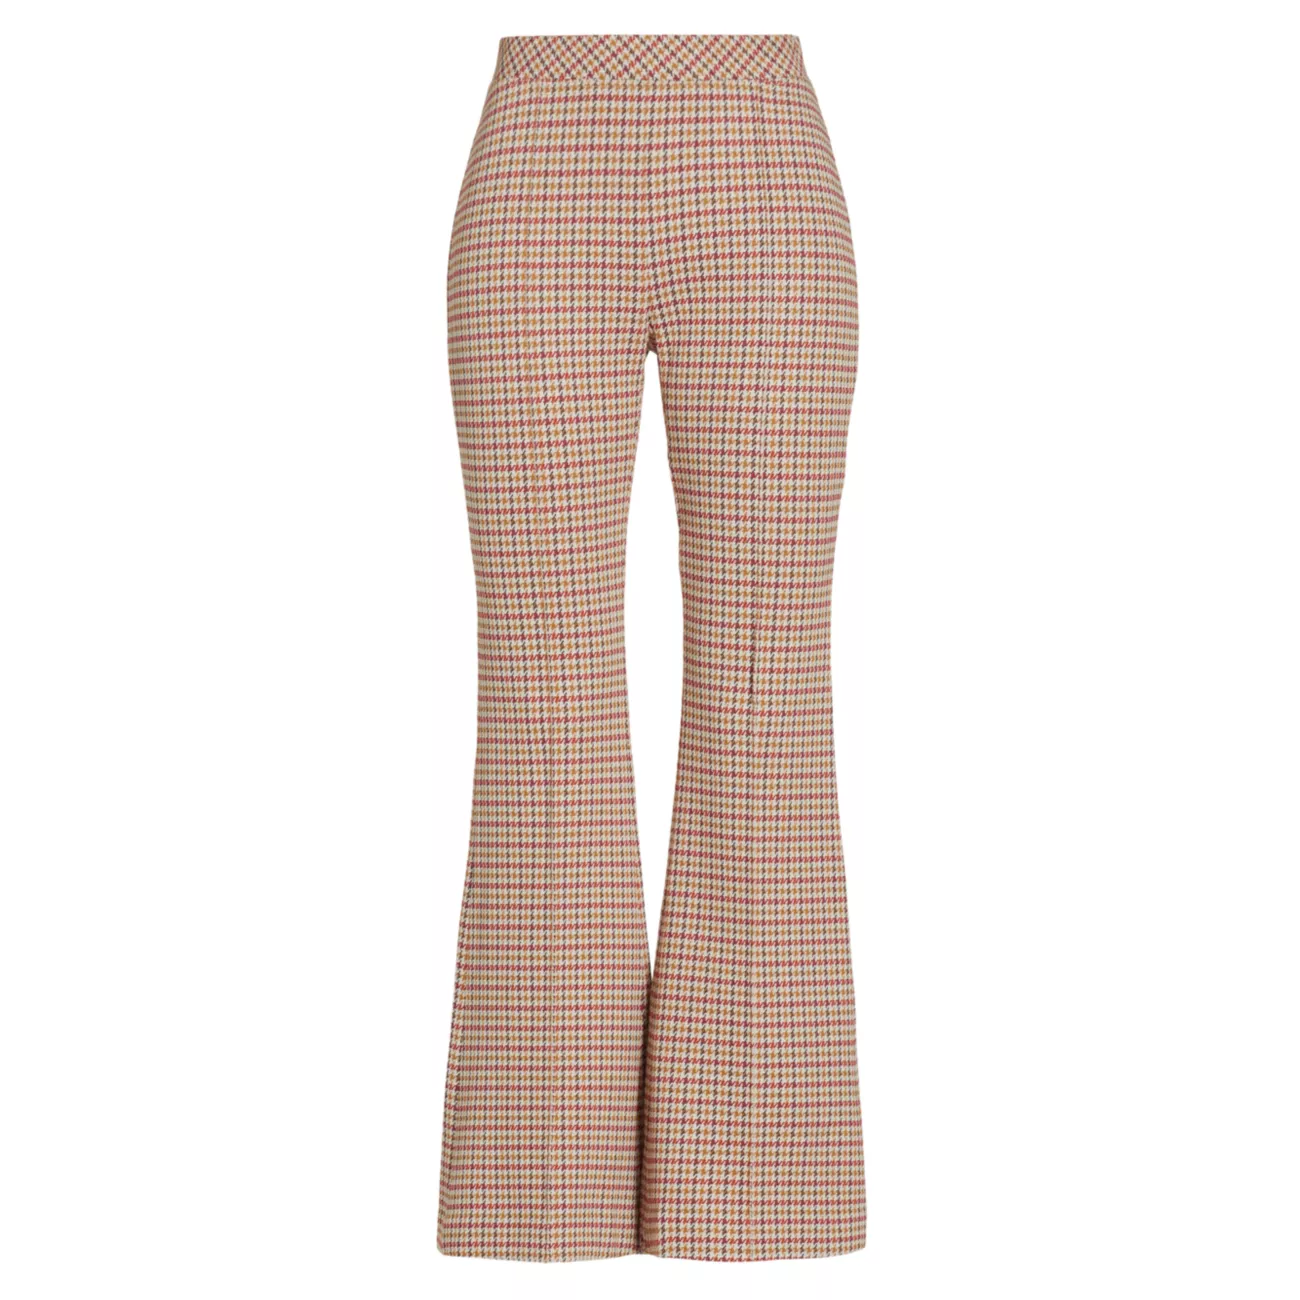 Houndstooth Stretch Crop Flare Pants Rosetta Getty